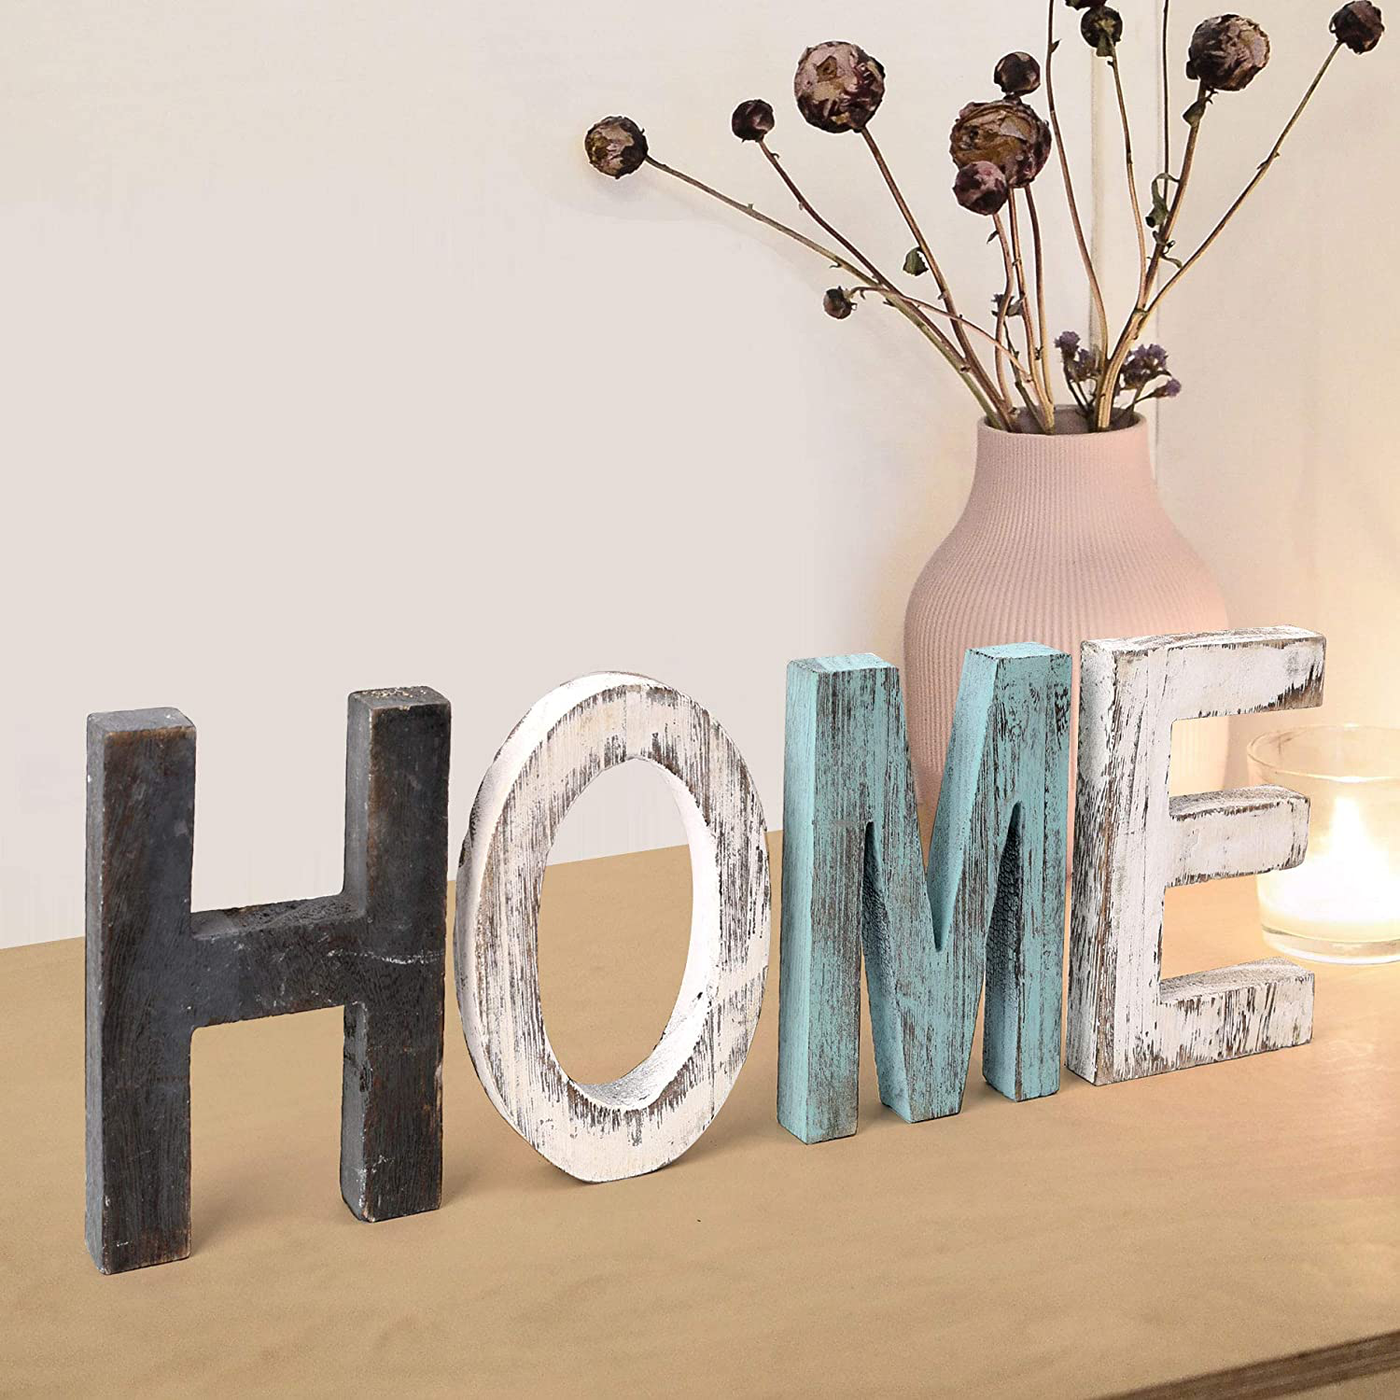 Home Signs Home Decor Sign, Teal Wall Decor Home Wooden Letters for Wall Decor Rustic Home Sign Turquoise